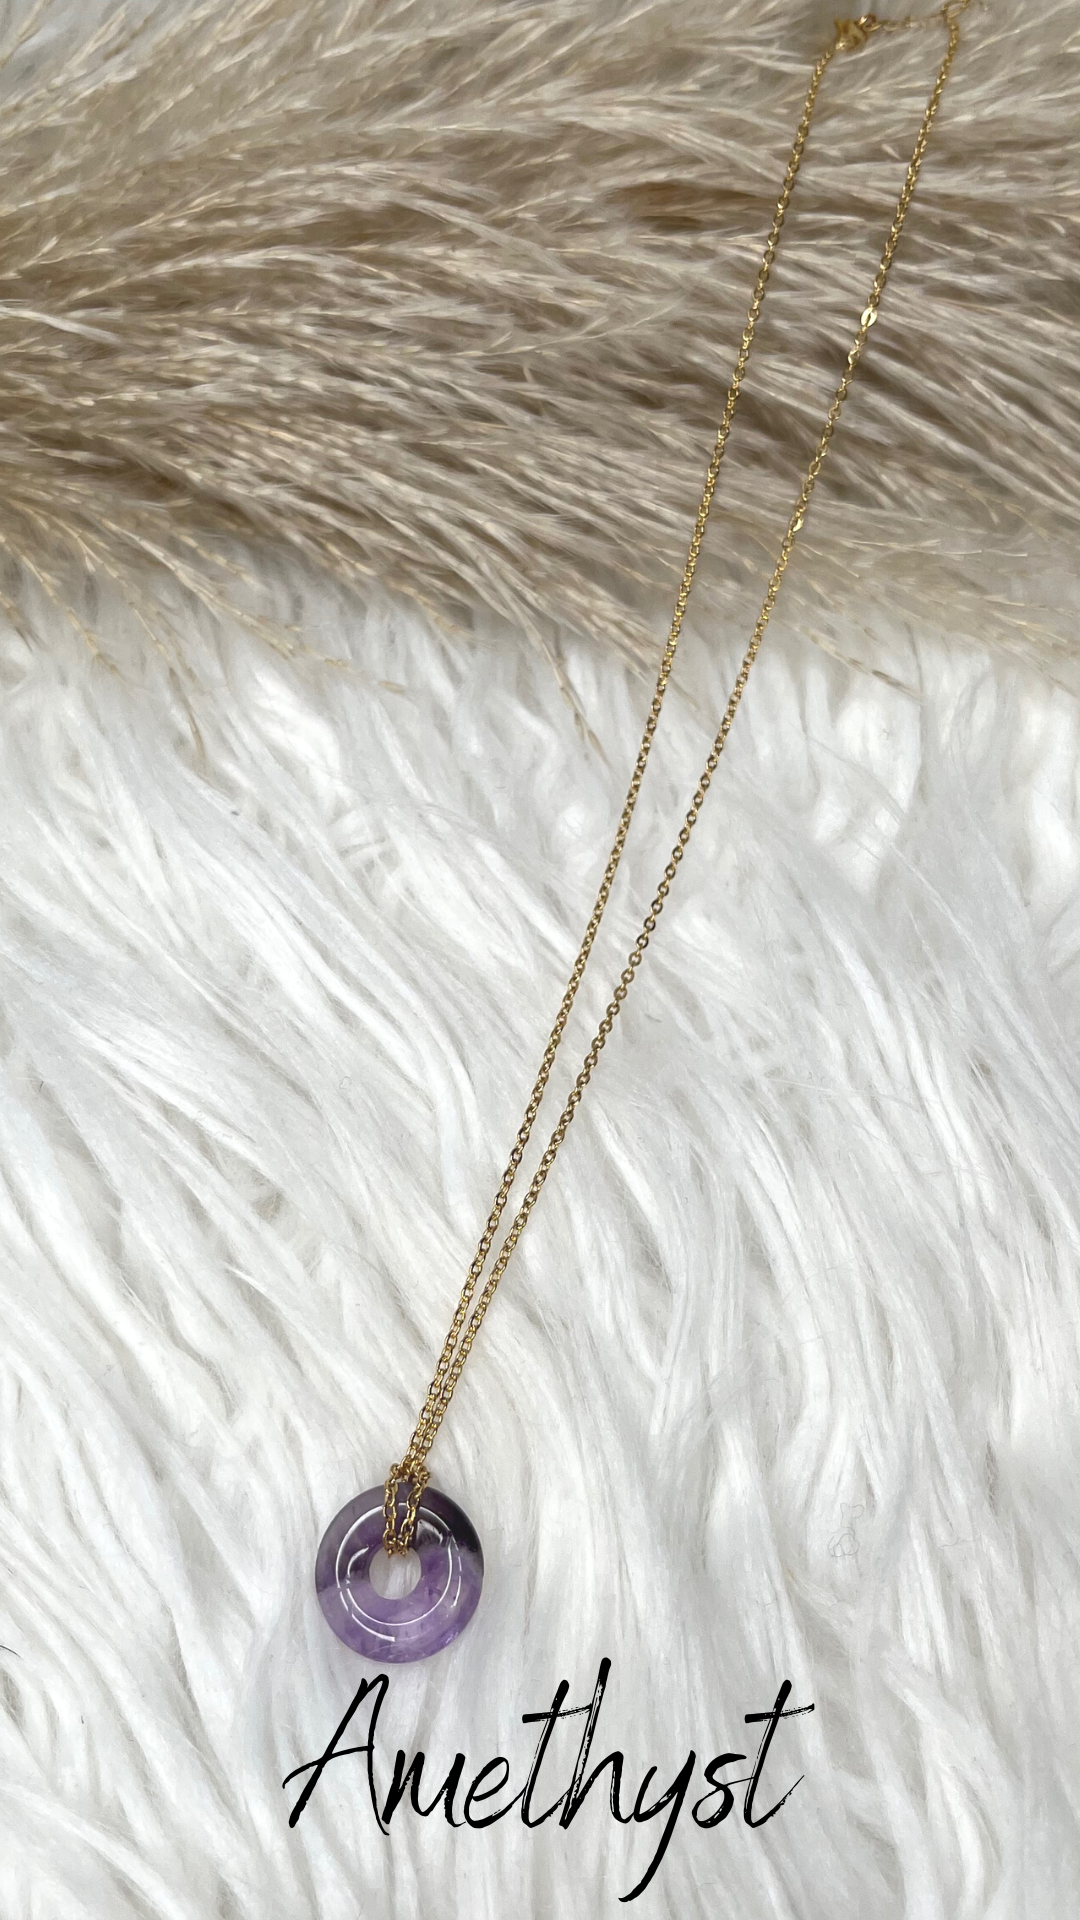 The Torus Necklace - Natural Amethyst crystal with 18k gold-plated, Stainless-steel chain